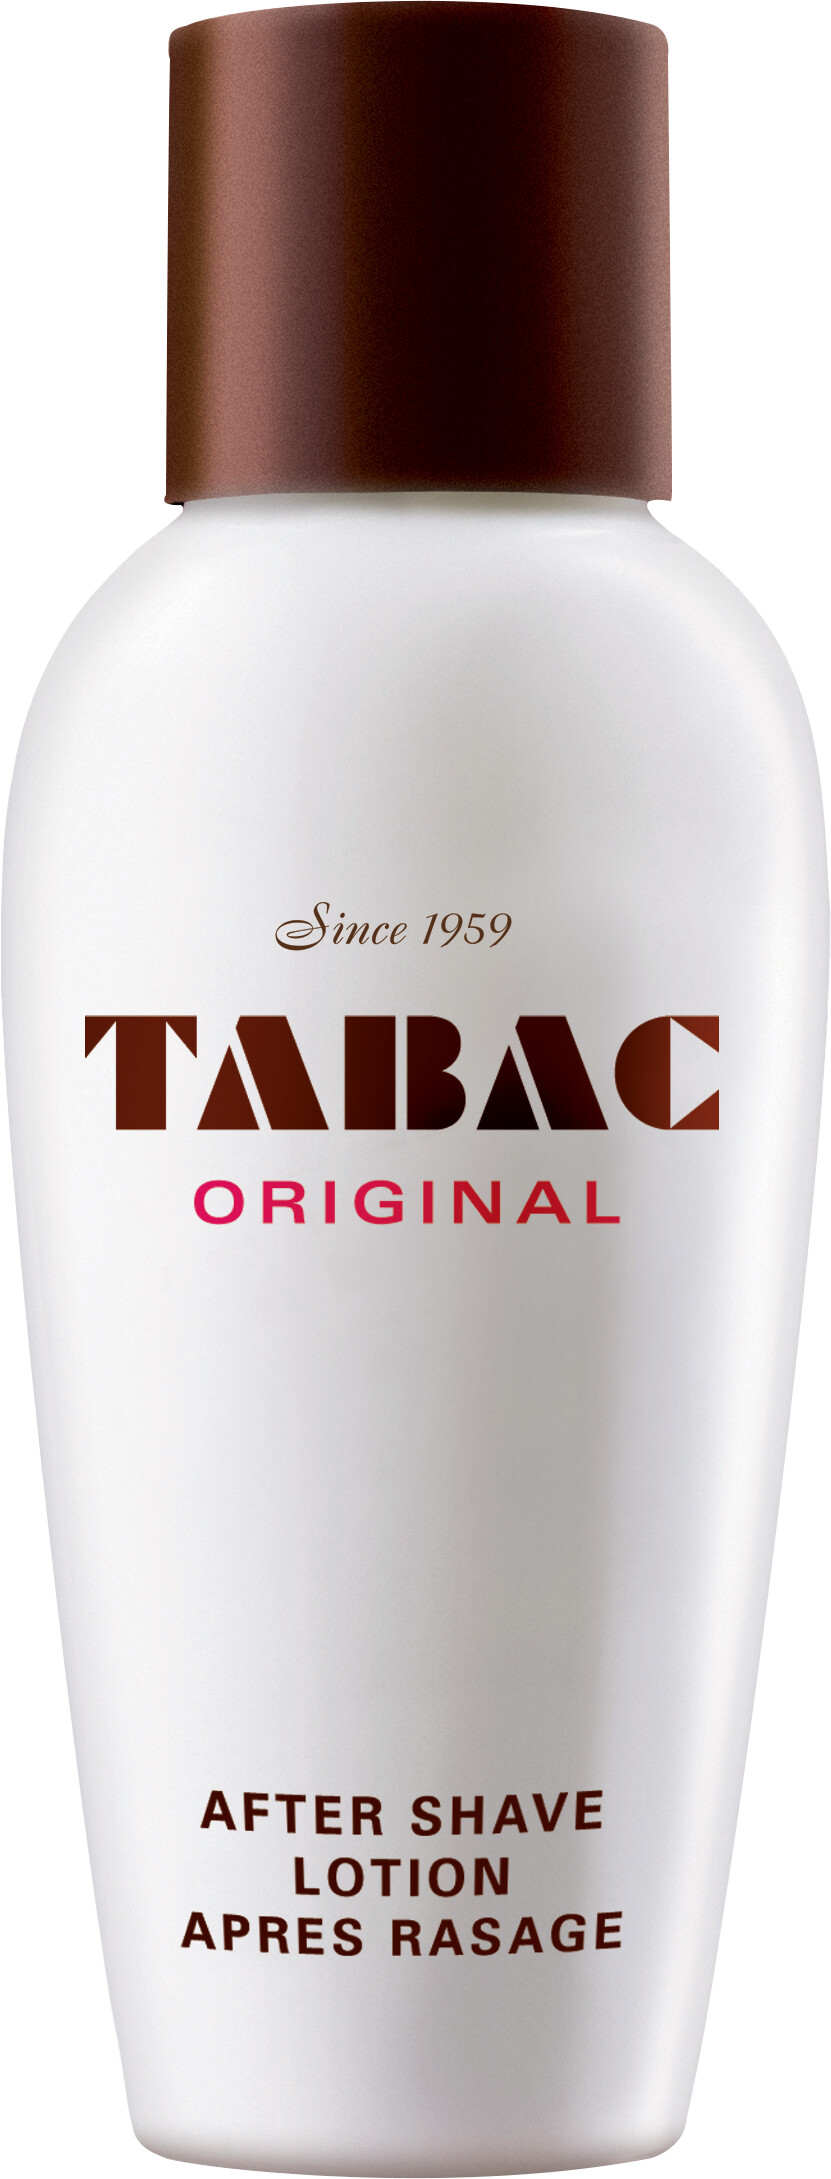 TABAC Original Aftershave Lotion 100ml